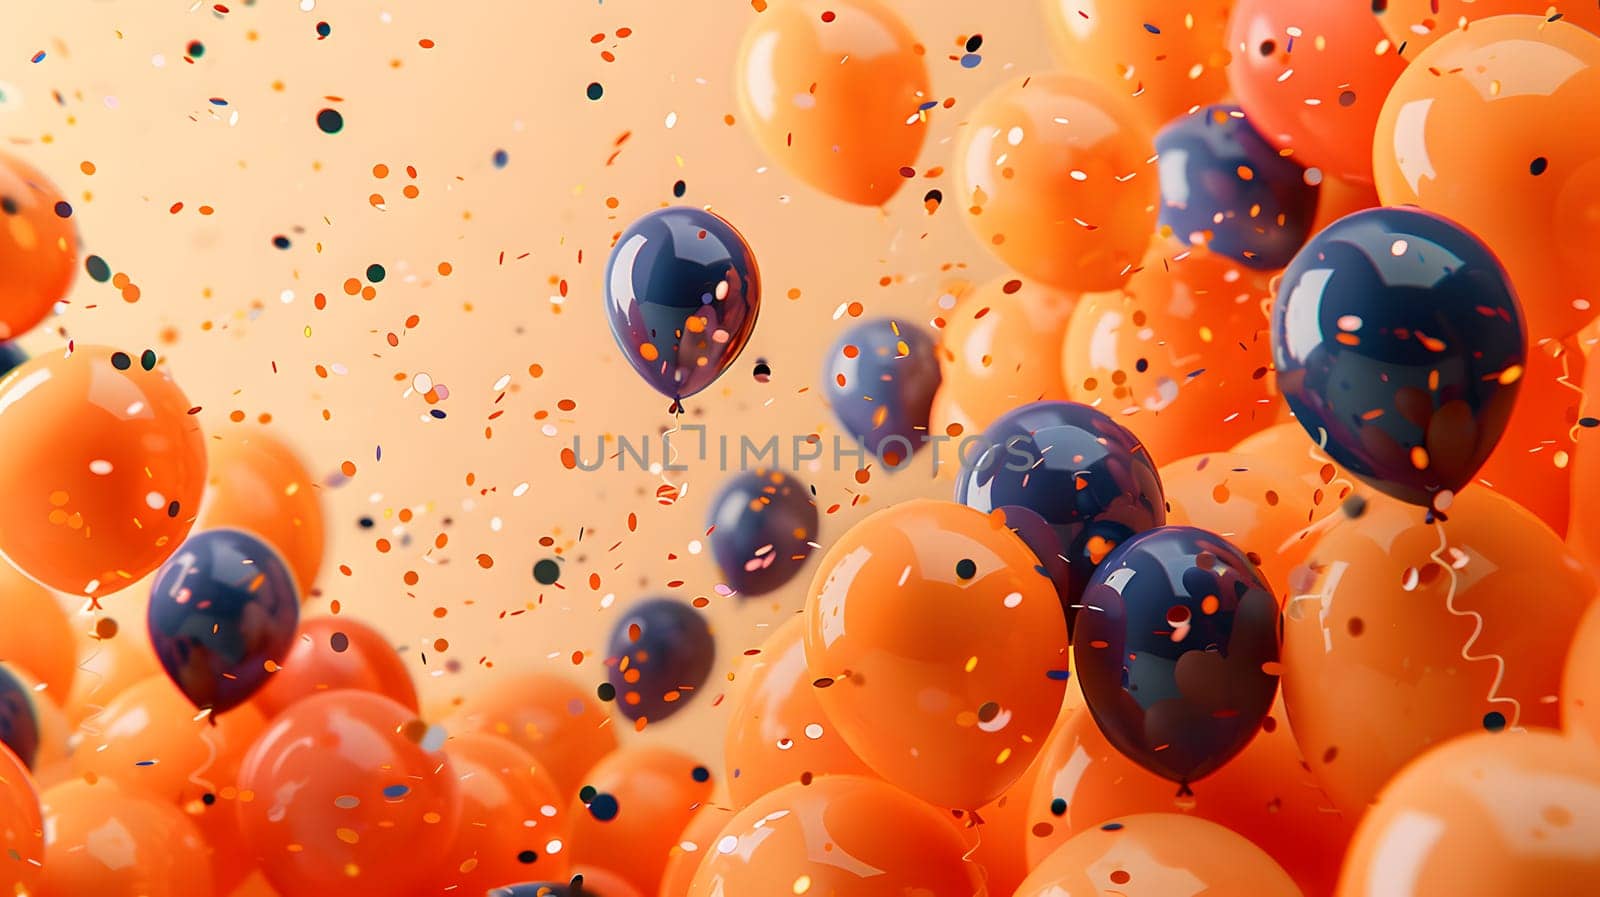 An electric blue liquid drop falls from a climbing hold of bright orange and amber balloons, creating a closeup view of a vibrant organism in the air